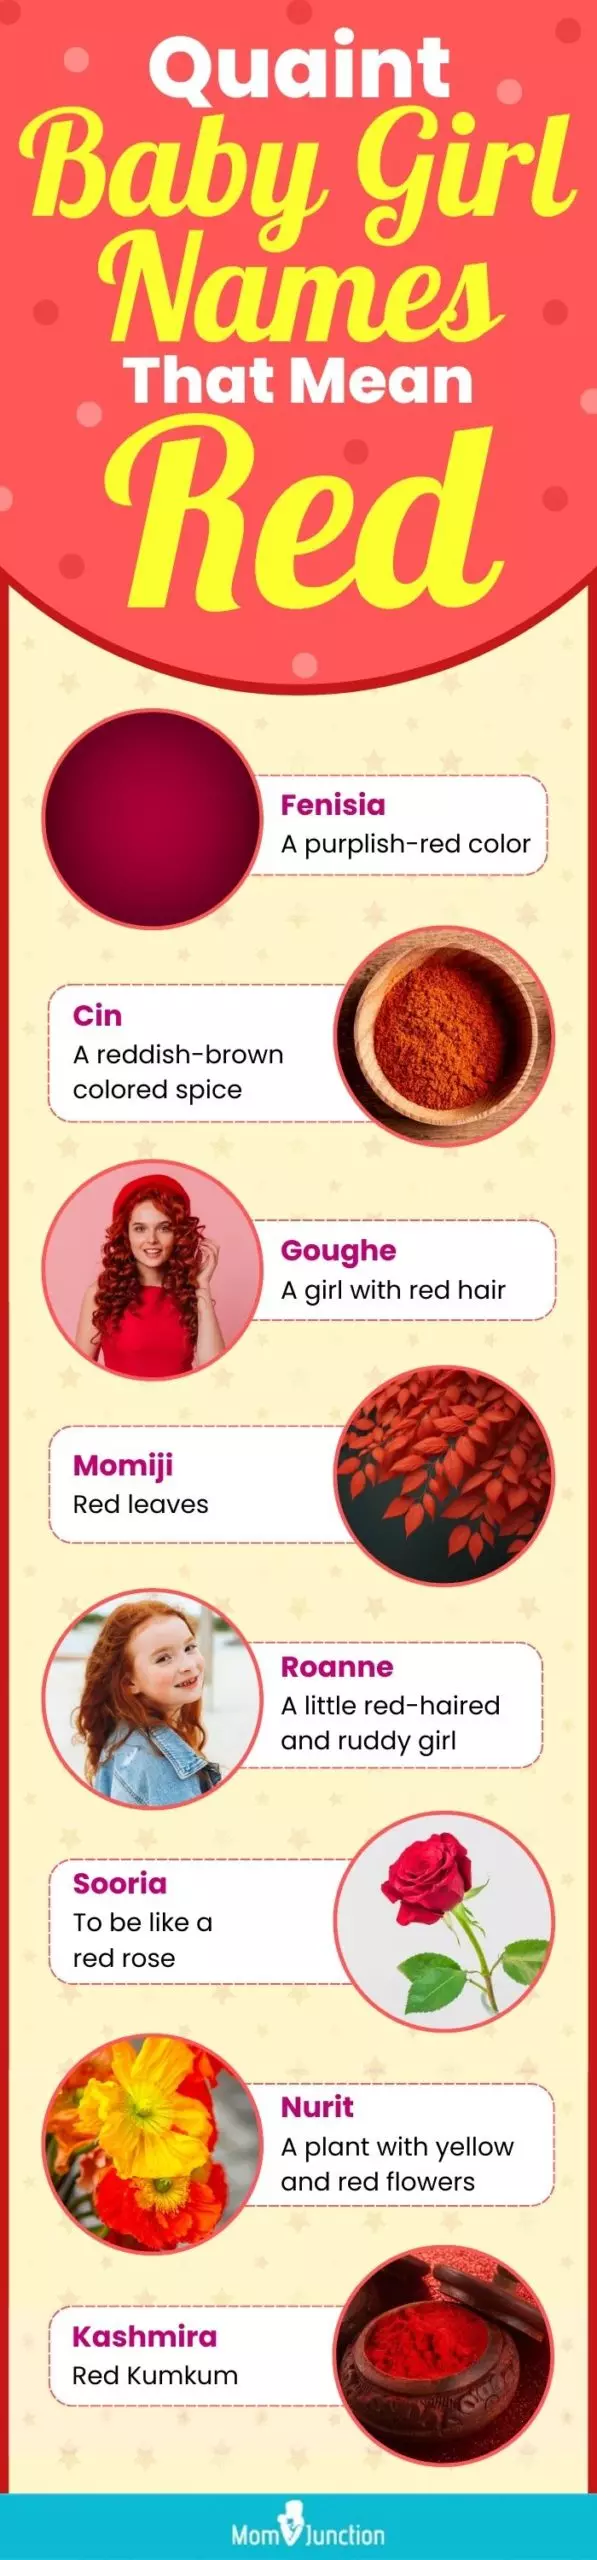 radiant baby girl names that mean red (infographic)